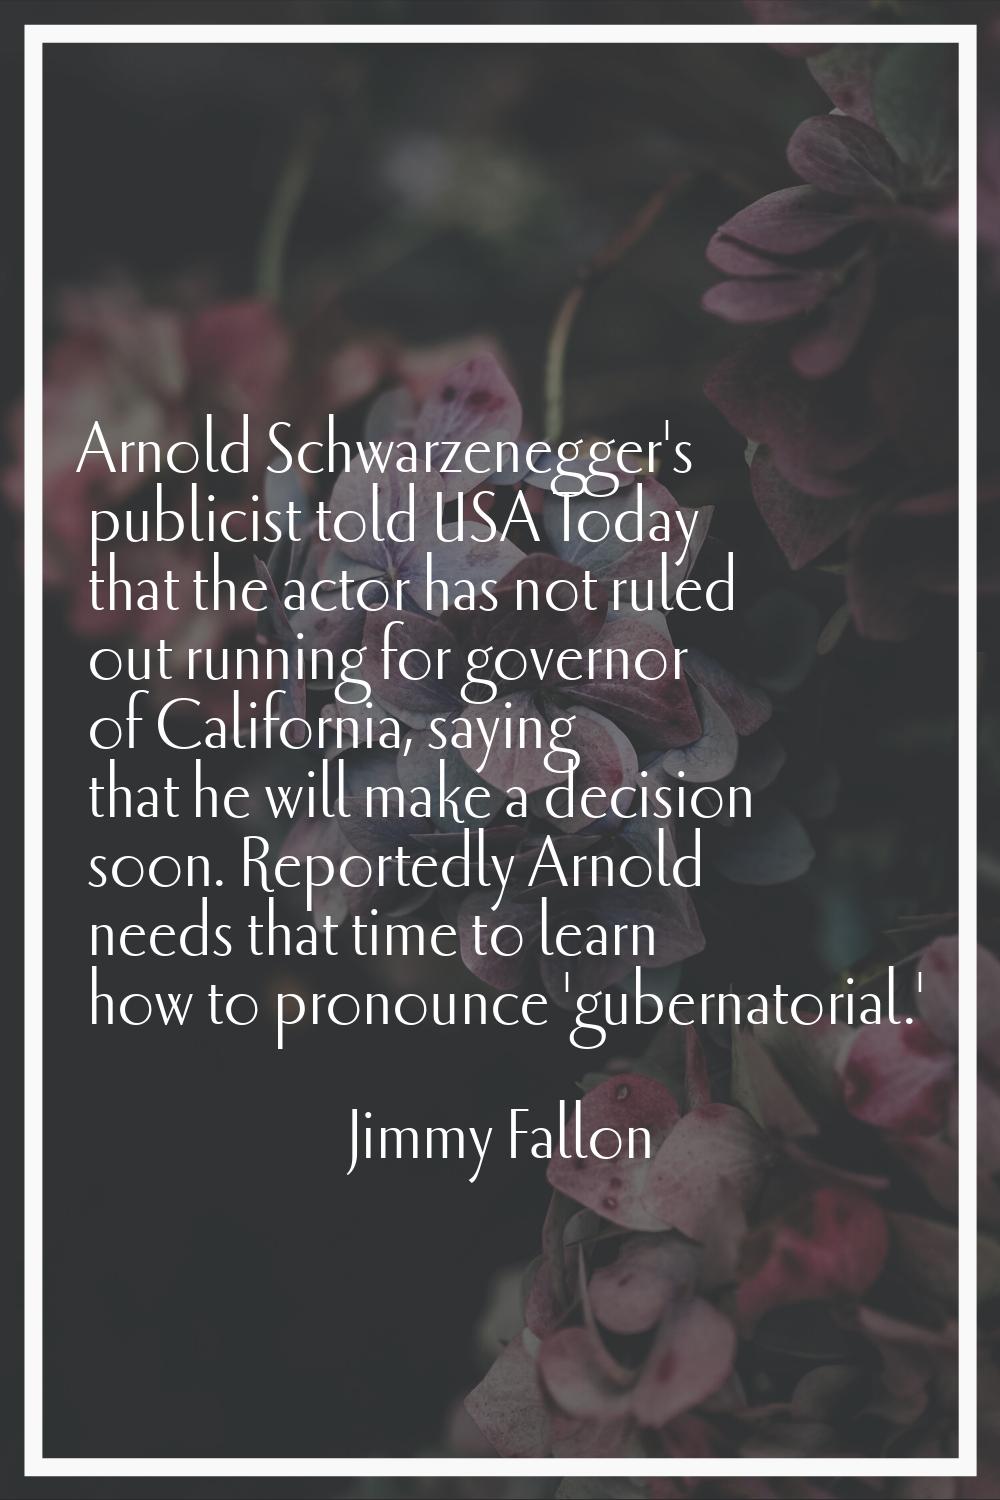 Arnold Schwarzenegger's publicist told USA Today that the actor has not ruled out running for gover